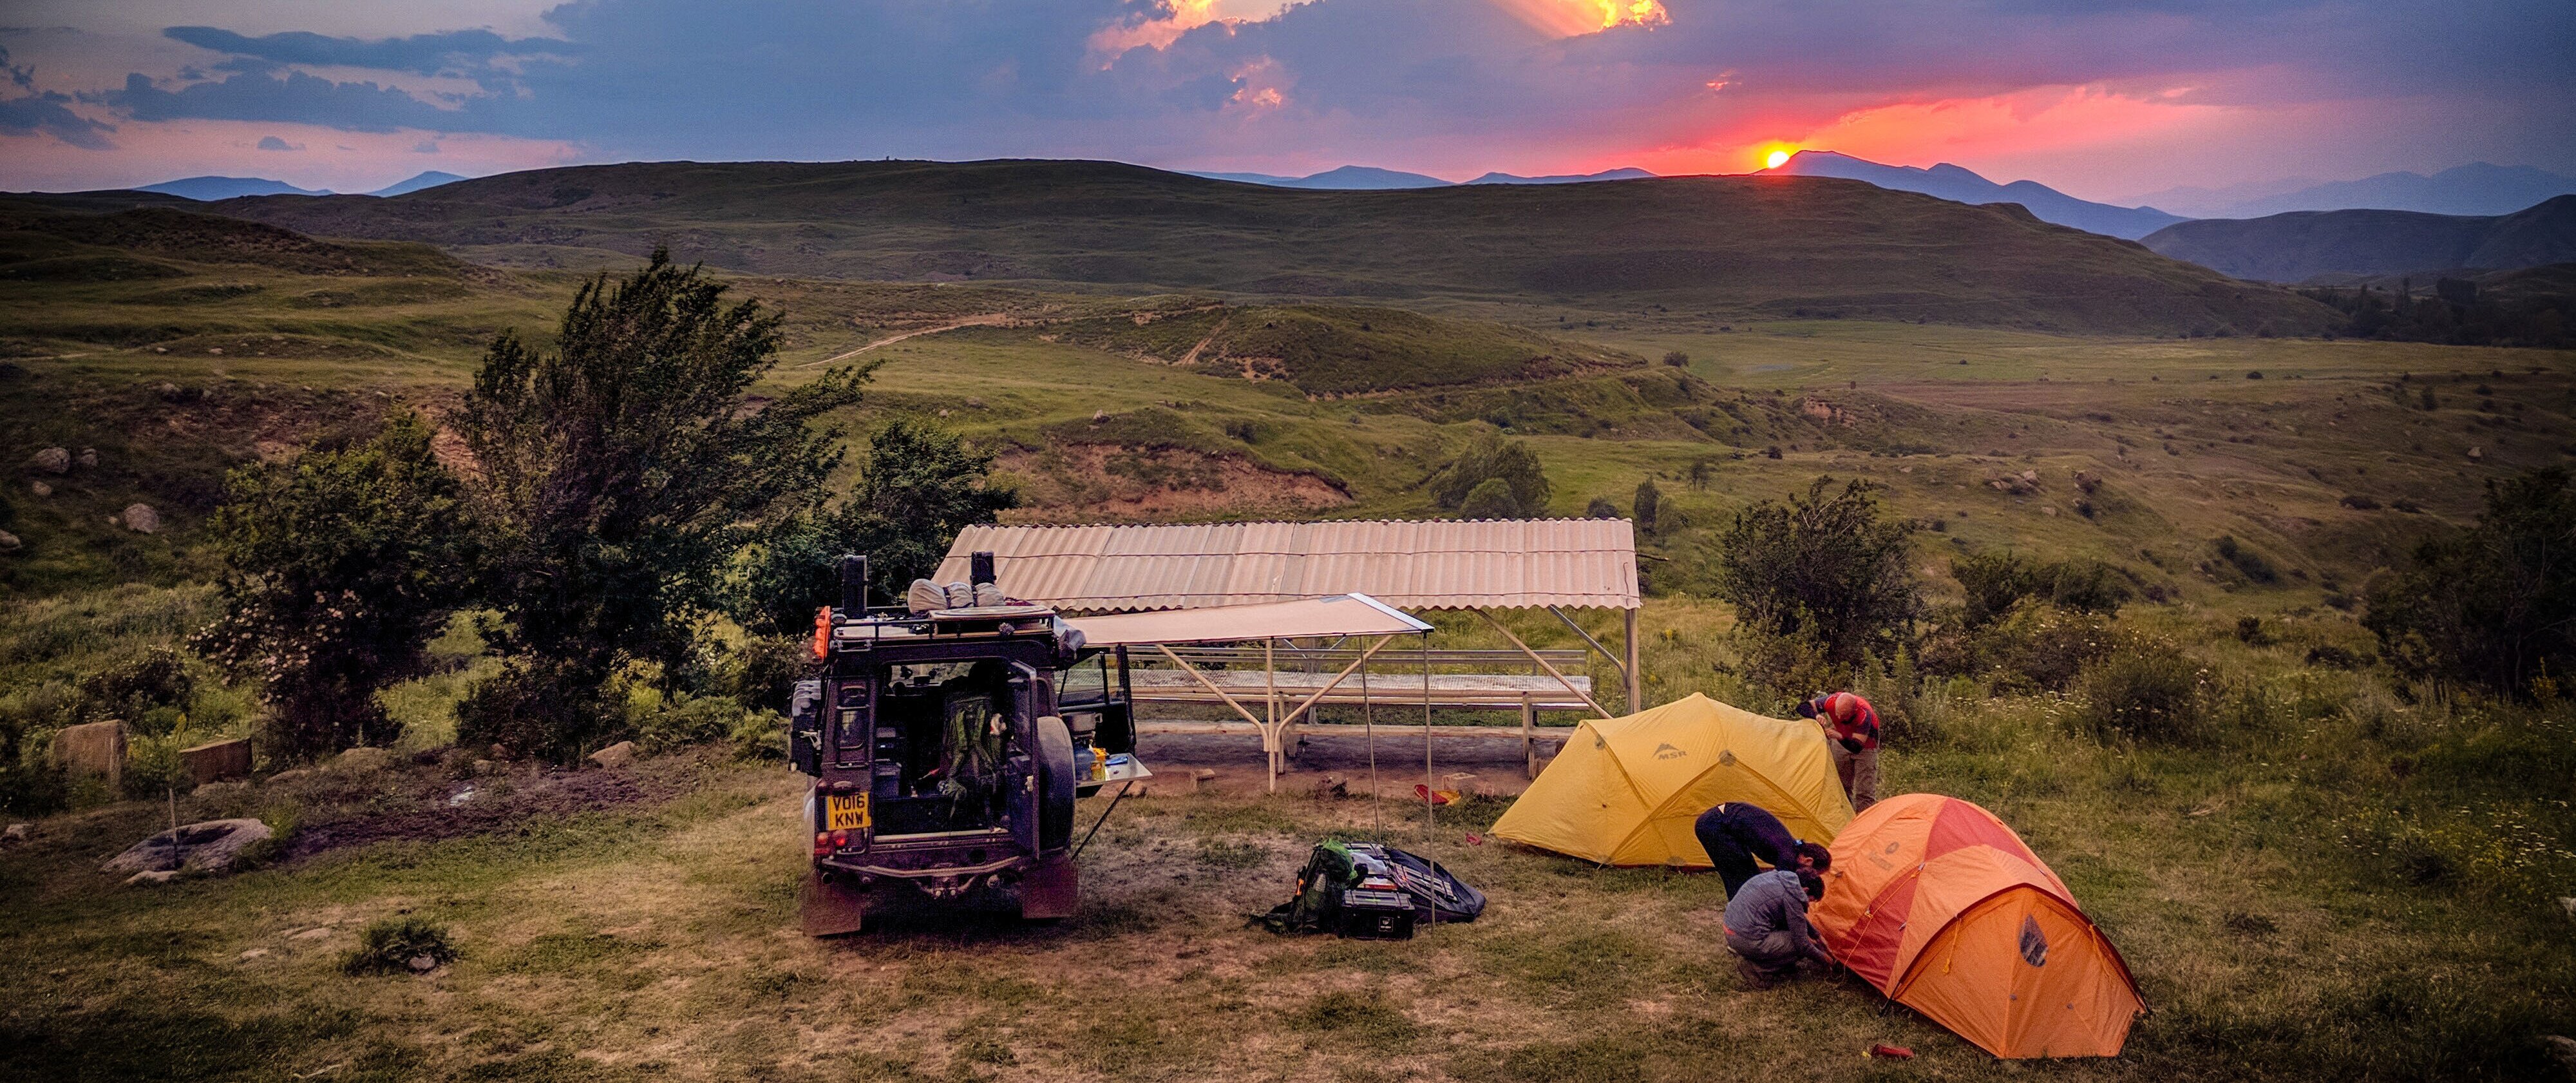 The Transcaucasian Expedition, supported by the 2016 Land Rover Bursary (Image: Tom Allen)